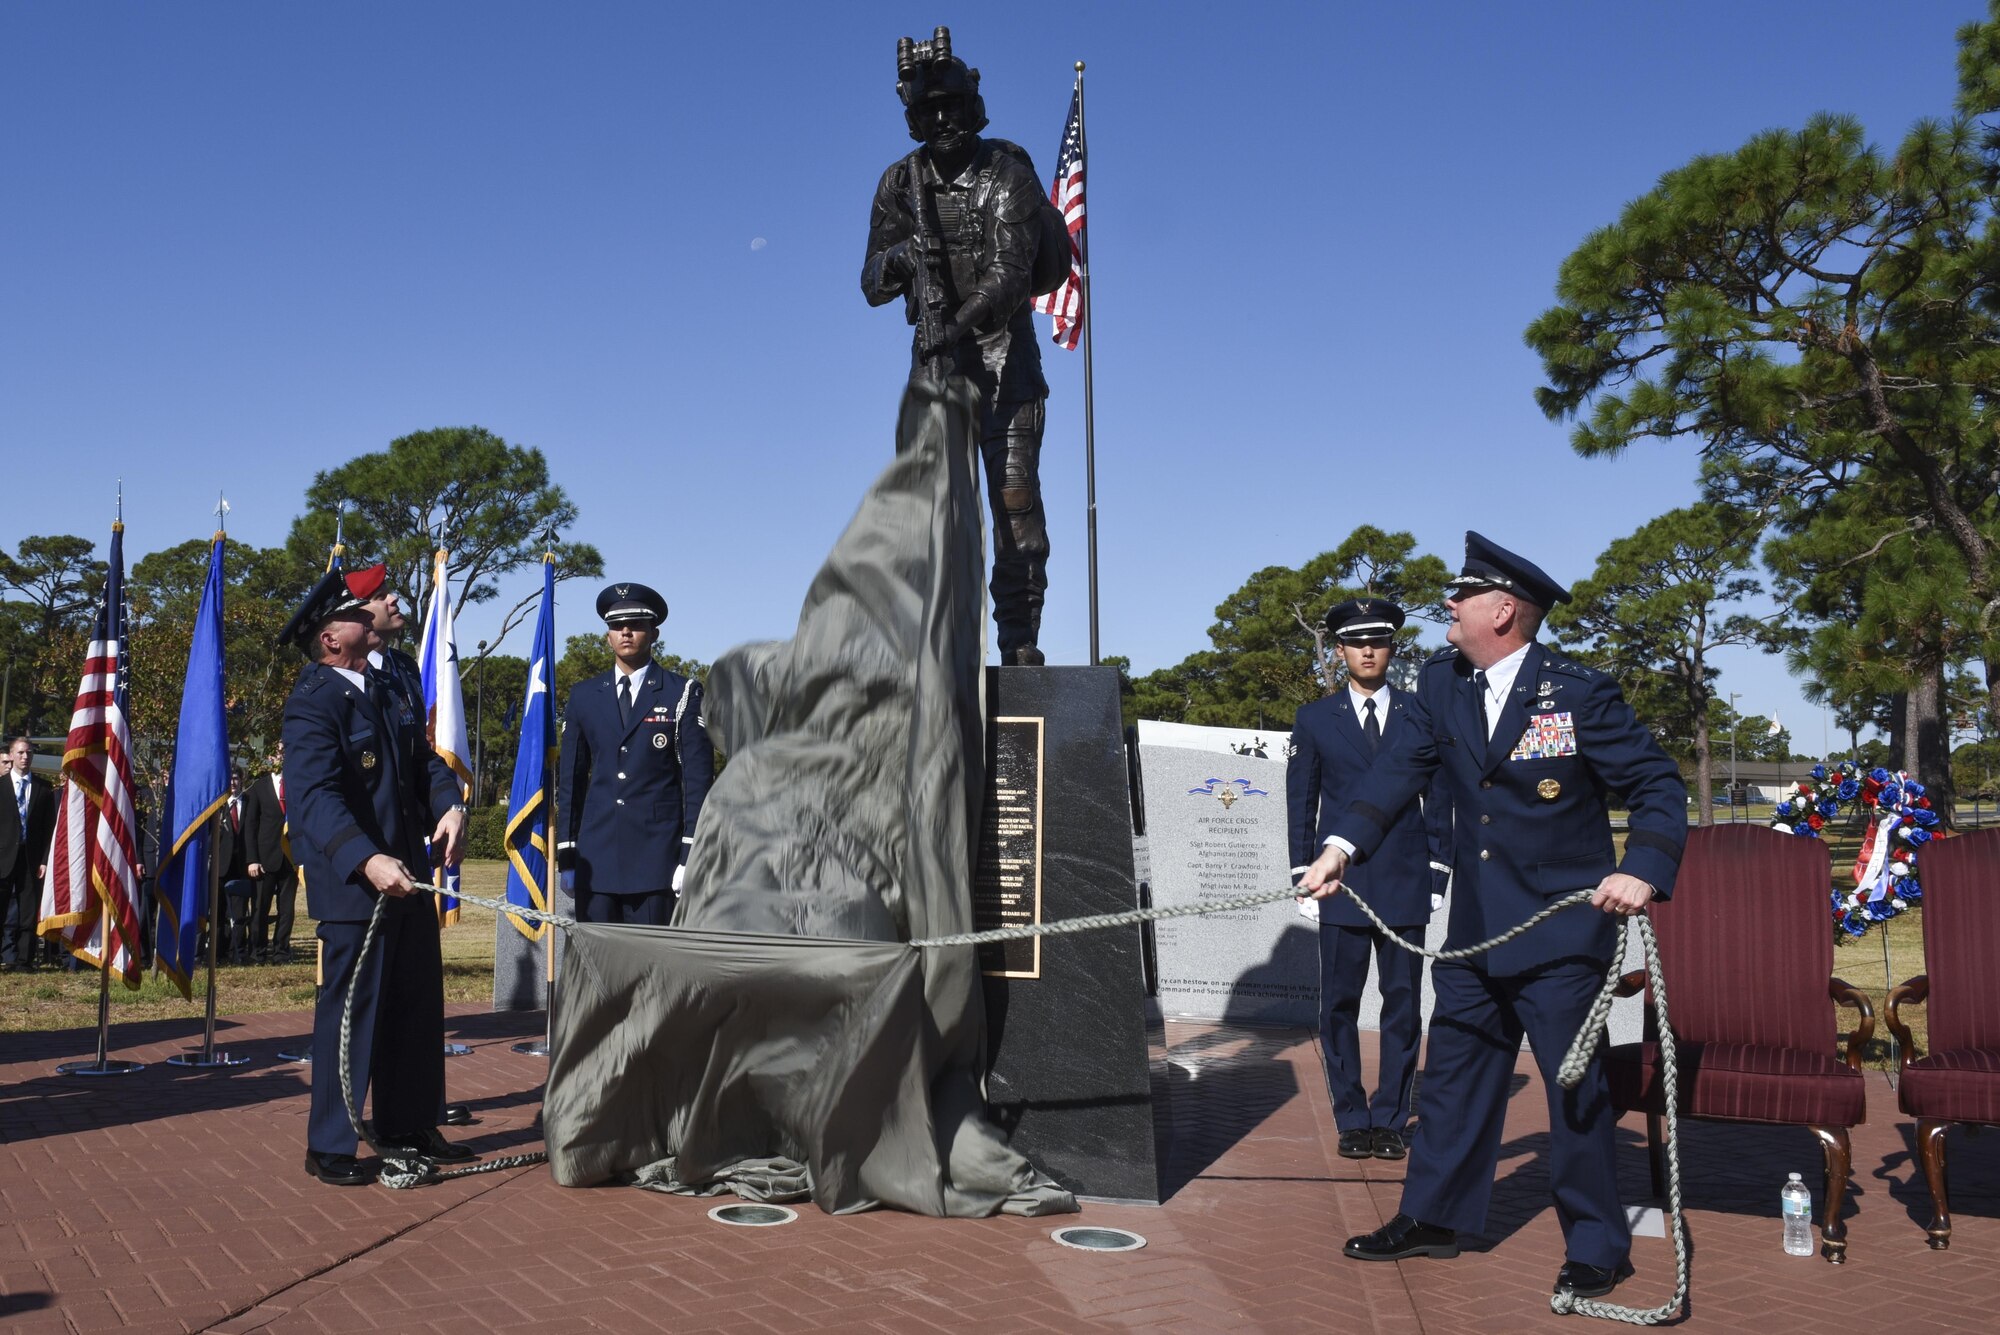 Air Force Chief of Staff David L. Goldfein and Lt. Gen. Brad Webb, the commander of Air Force Special Operations Command, unveil the Special Tactics Memorial during a dedication ceremony at Hurlburt Field, Fla., Oct. 20, 2016. Goldfein was the keynote speaker for the ceremony. In addition to the ceremony, he met with Air Force Special Operations Command leadership, 505th Command and Control Wing personnel and Air Commandos around base. (U.S. Air Force photo by Senior Airman Jeffrey Parkinson)